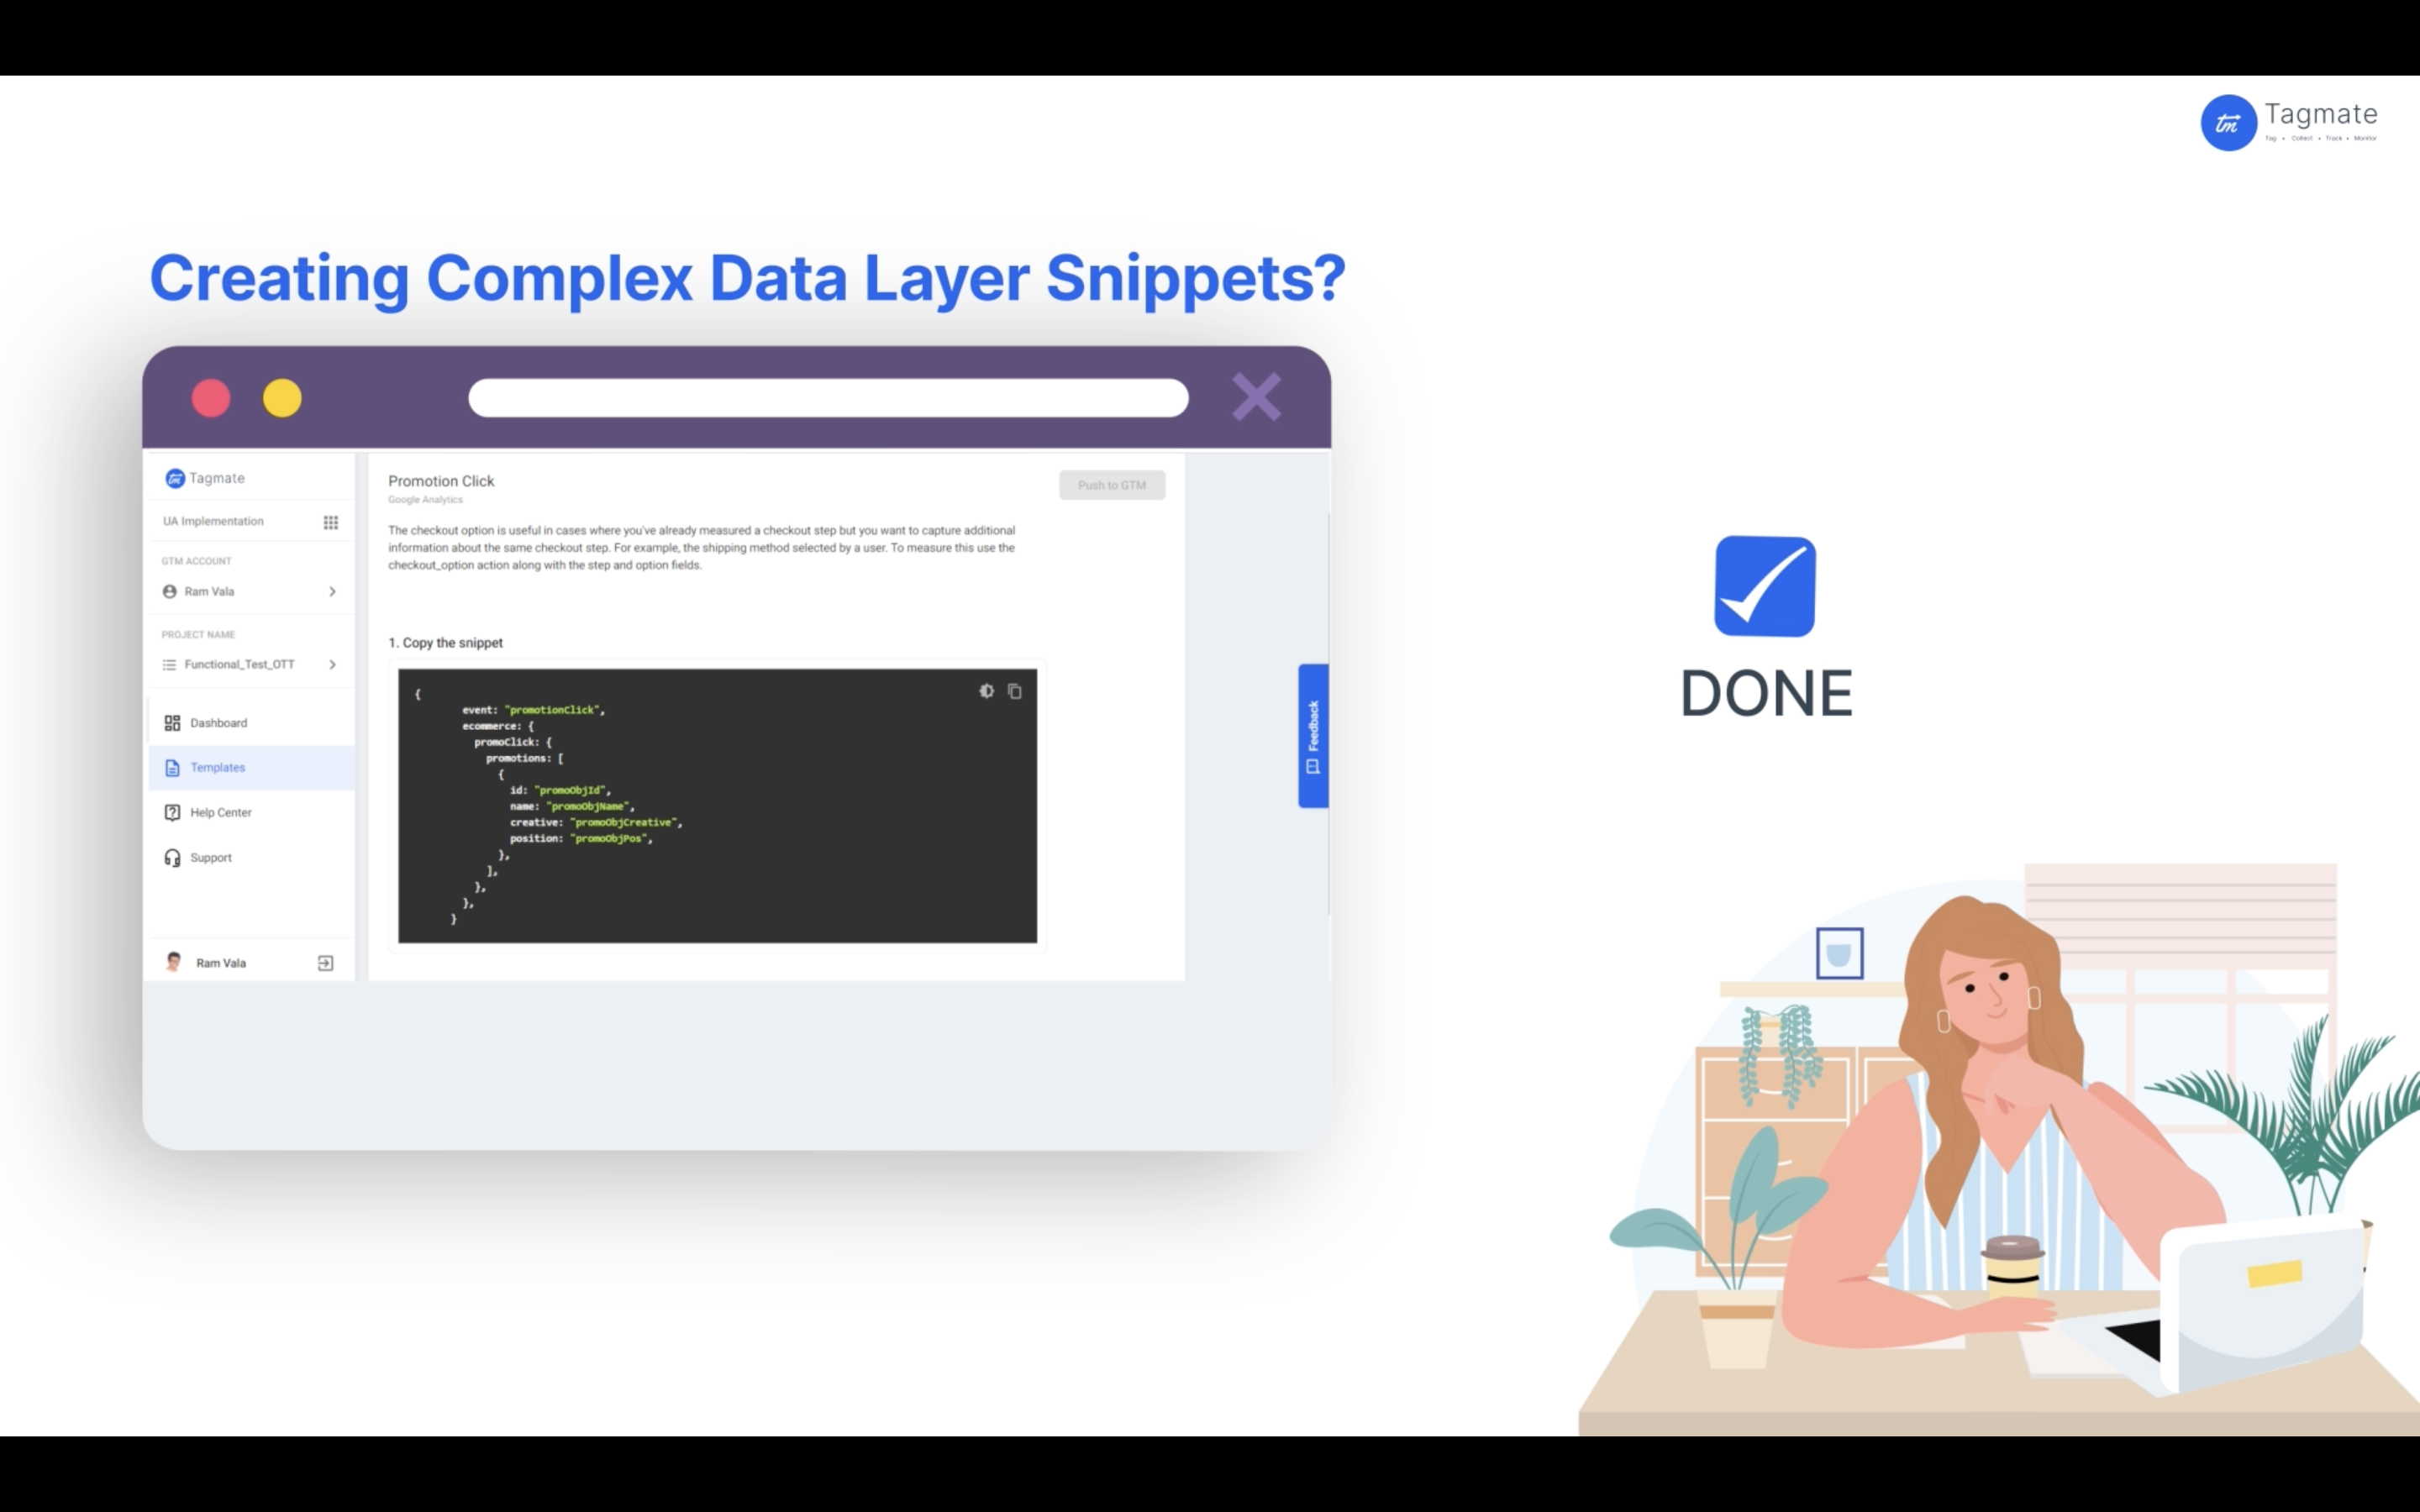 Tagmate helps you automate creation of complex data layer snippets under Google Tag Manager, within just a few clicks.